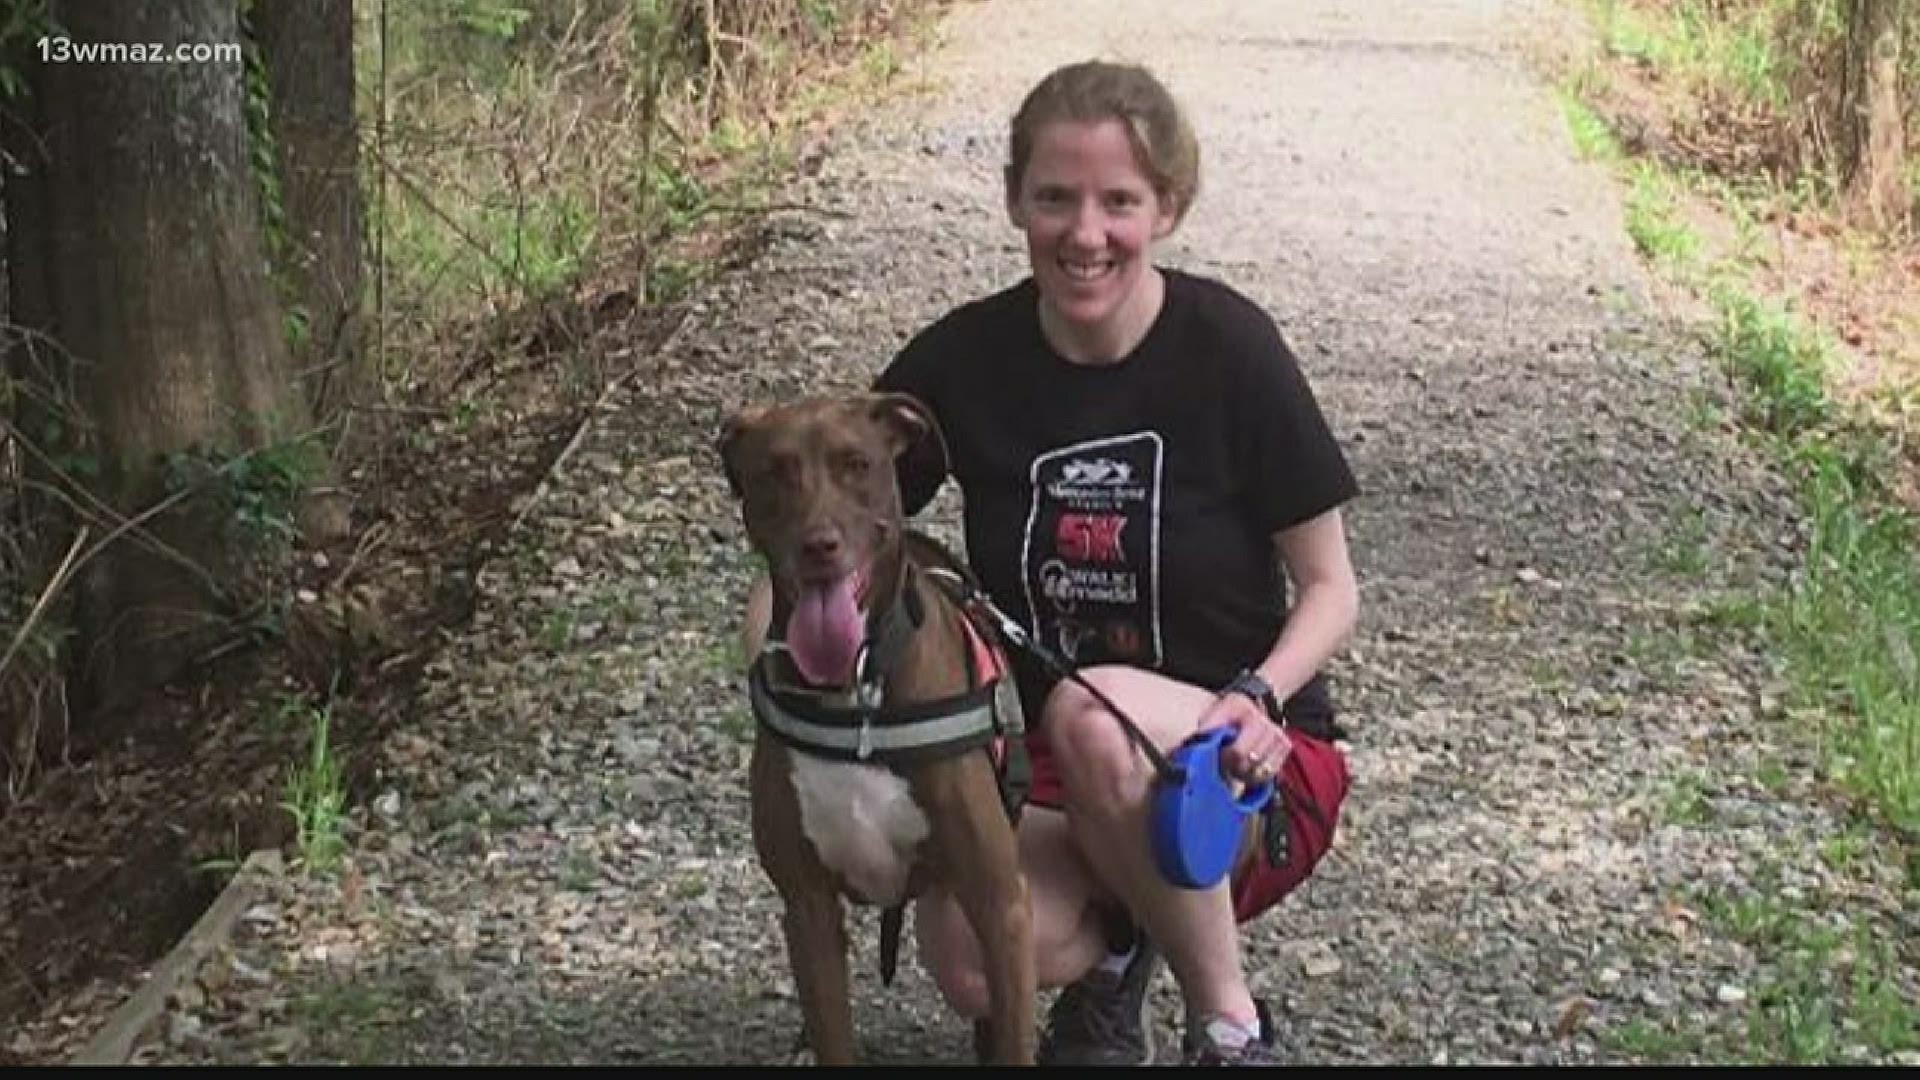 Losing your dog can be a nightmare. One woman used dogged determination and the help of some new-found friends to bring her pal home.